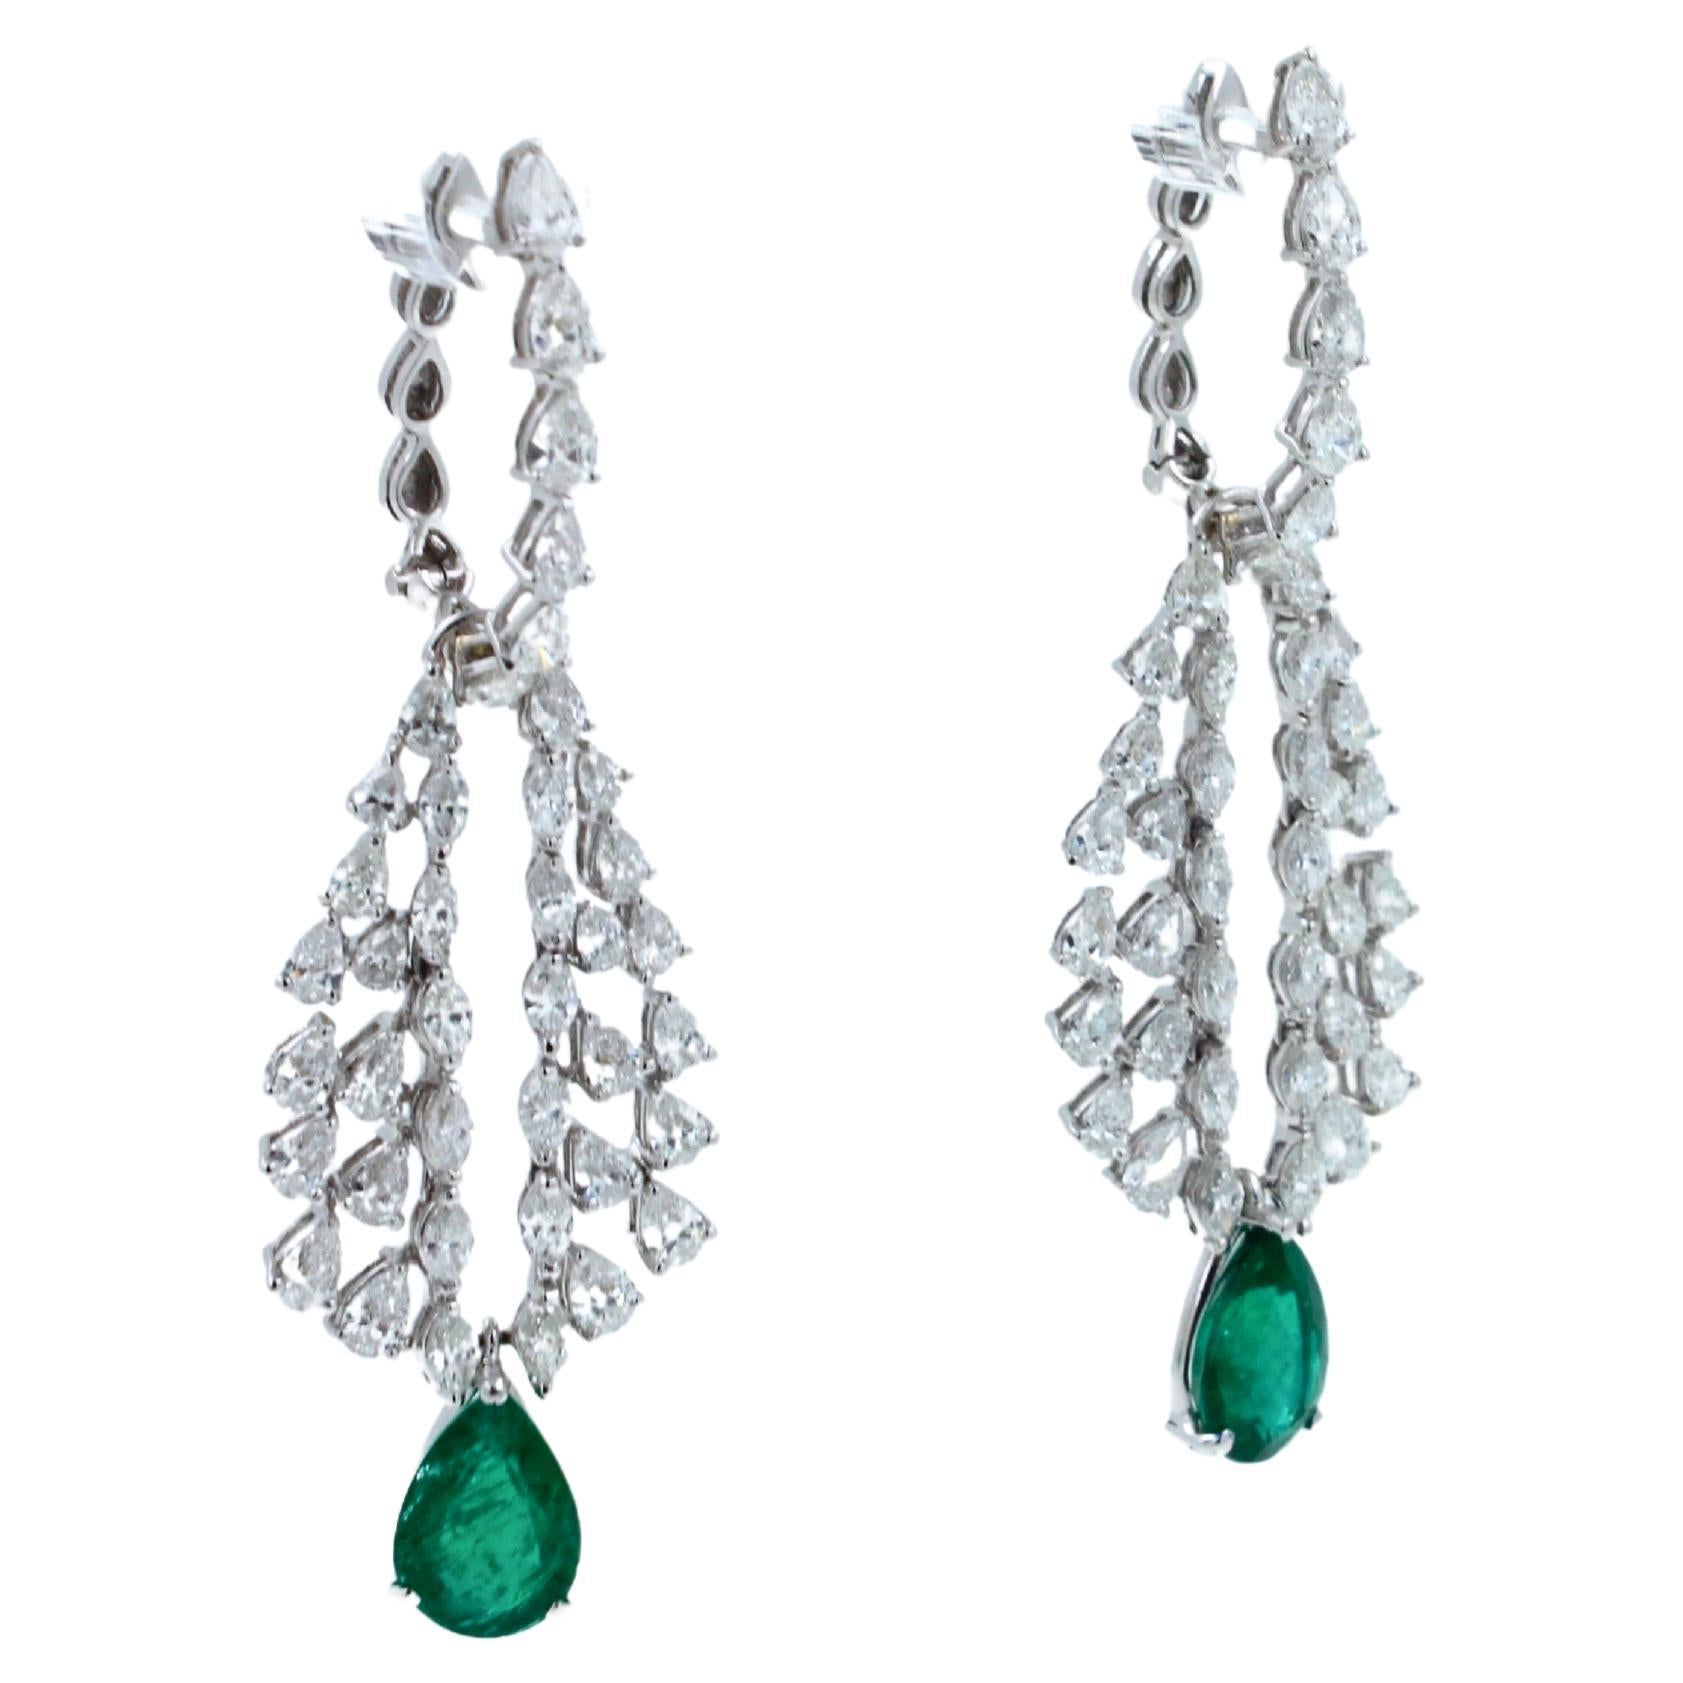 18K White Gold
11.66 grams weight
2.25 inches length 
3.00 cts G/VS Diamonds 
6 CTW Emeralds 
Emerald Color - Medium Mysterious Green with Lighter Hues, Especially in Light